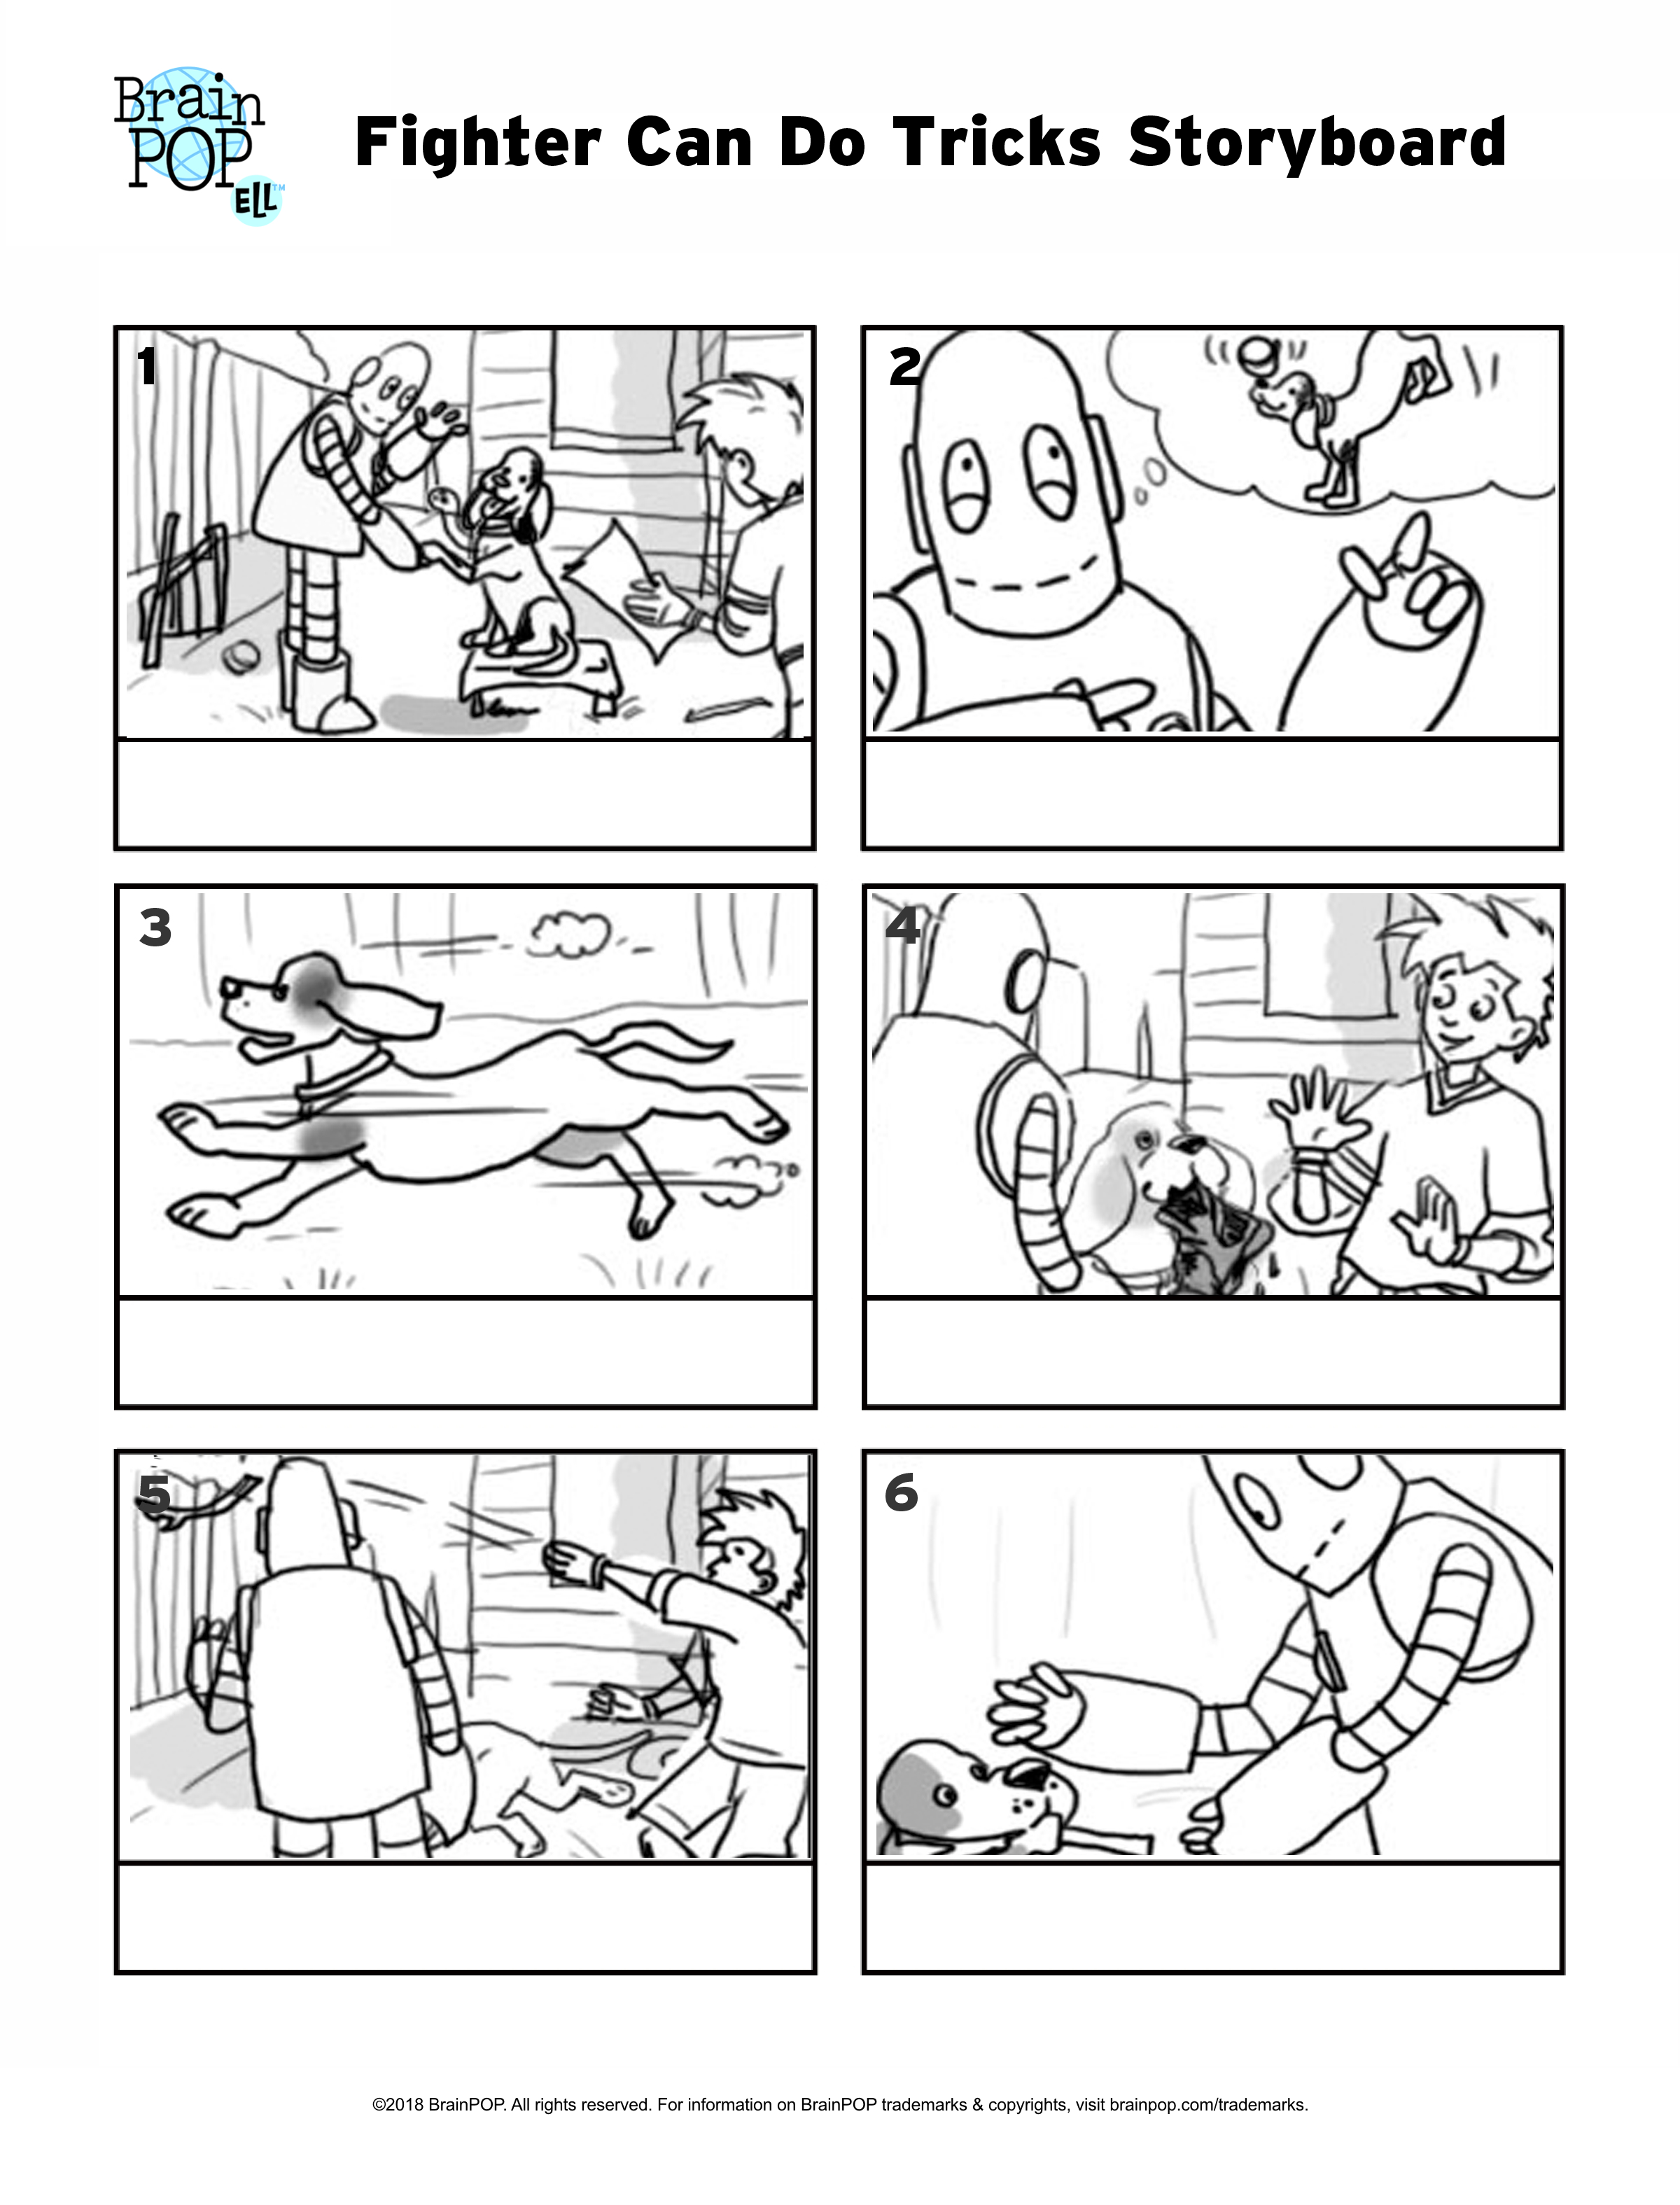 Fighter Can Do Tricks Storyboard